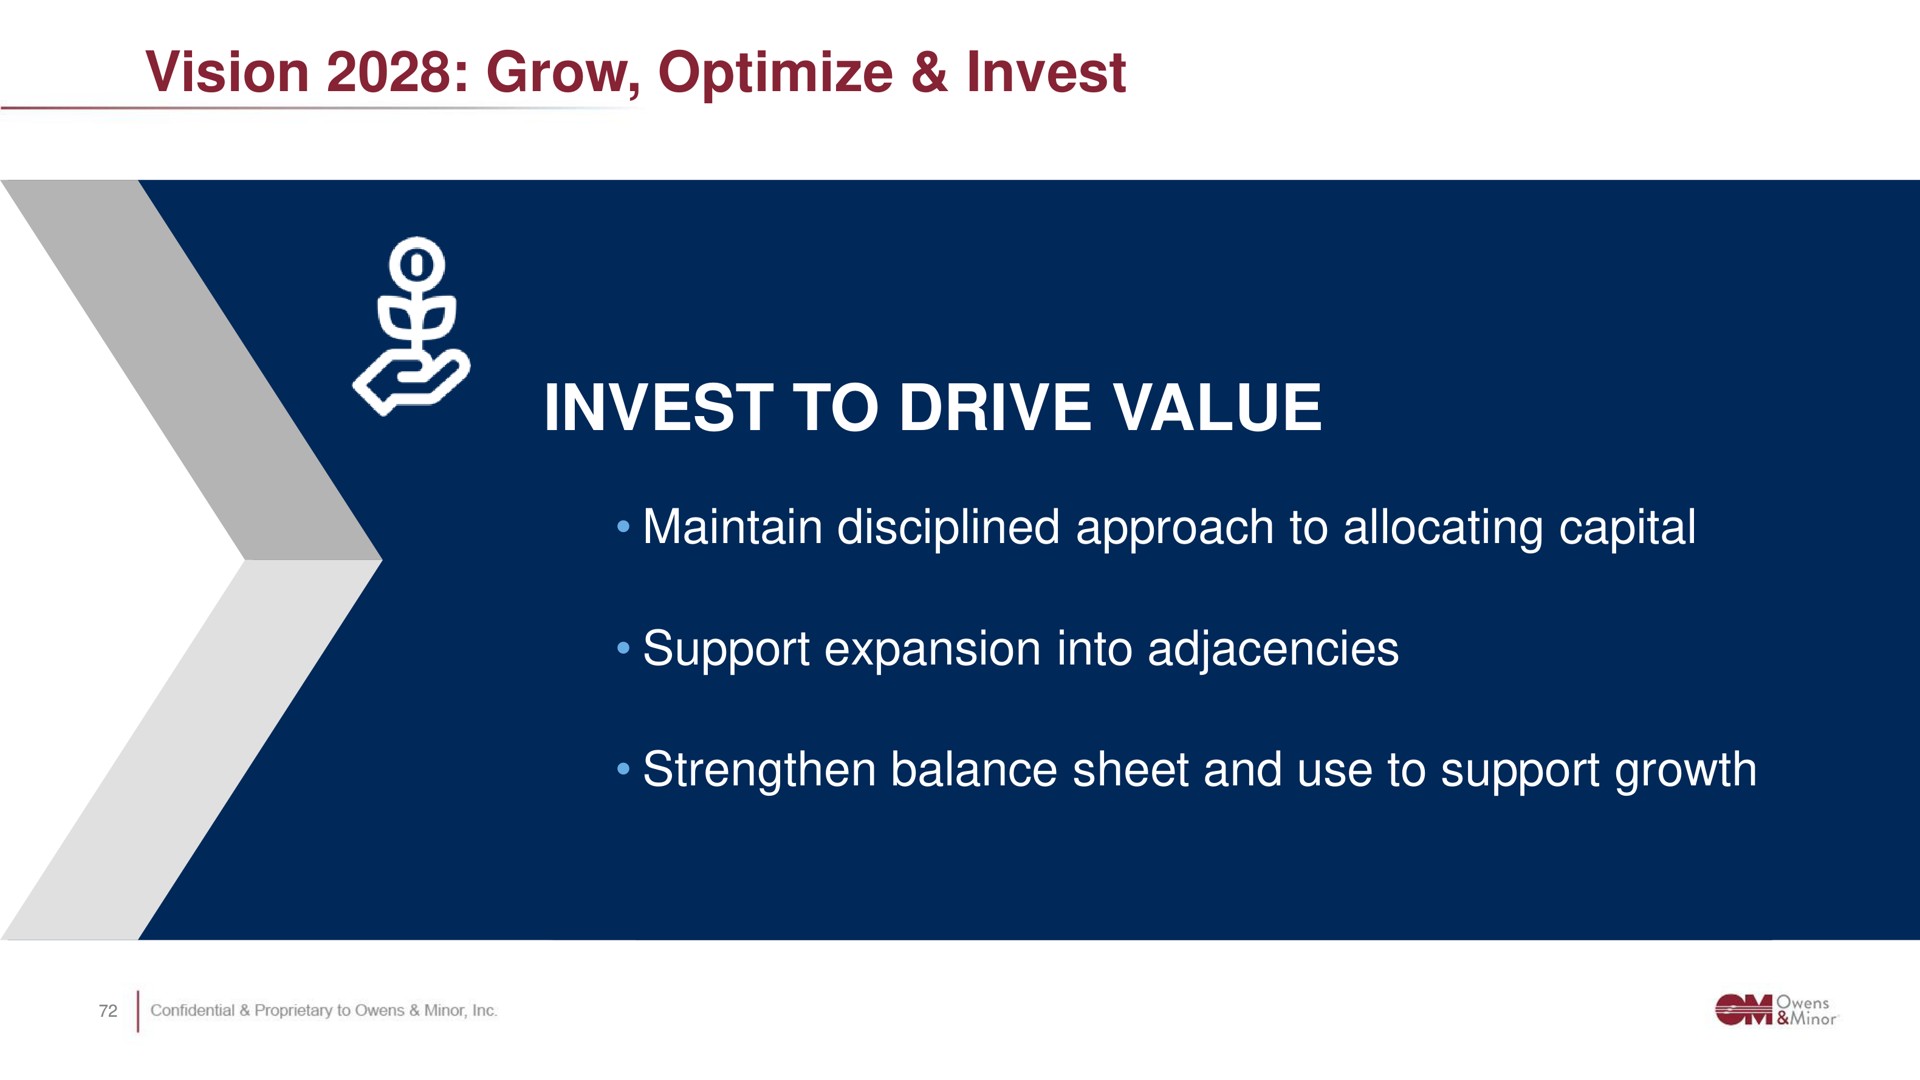 vision grow optimize invest accelerate growth invest to drive value maintain disciplined approach to allocating capital optimize support expansion into adjacencies strengthen balance sheet and use to support growth invest to drive value | Owens&Minor